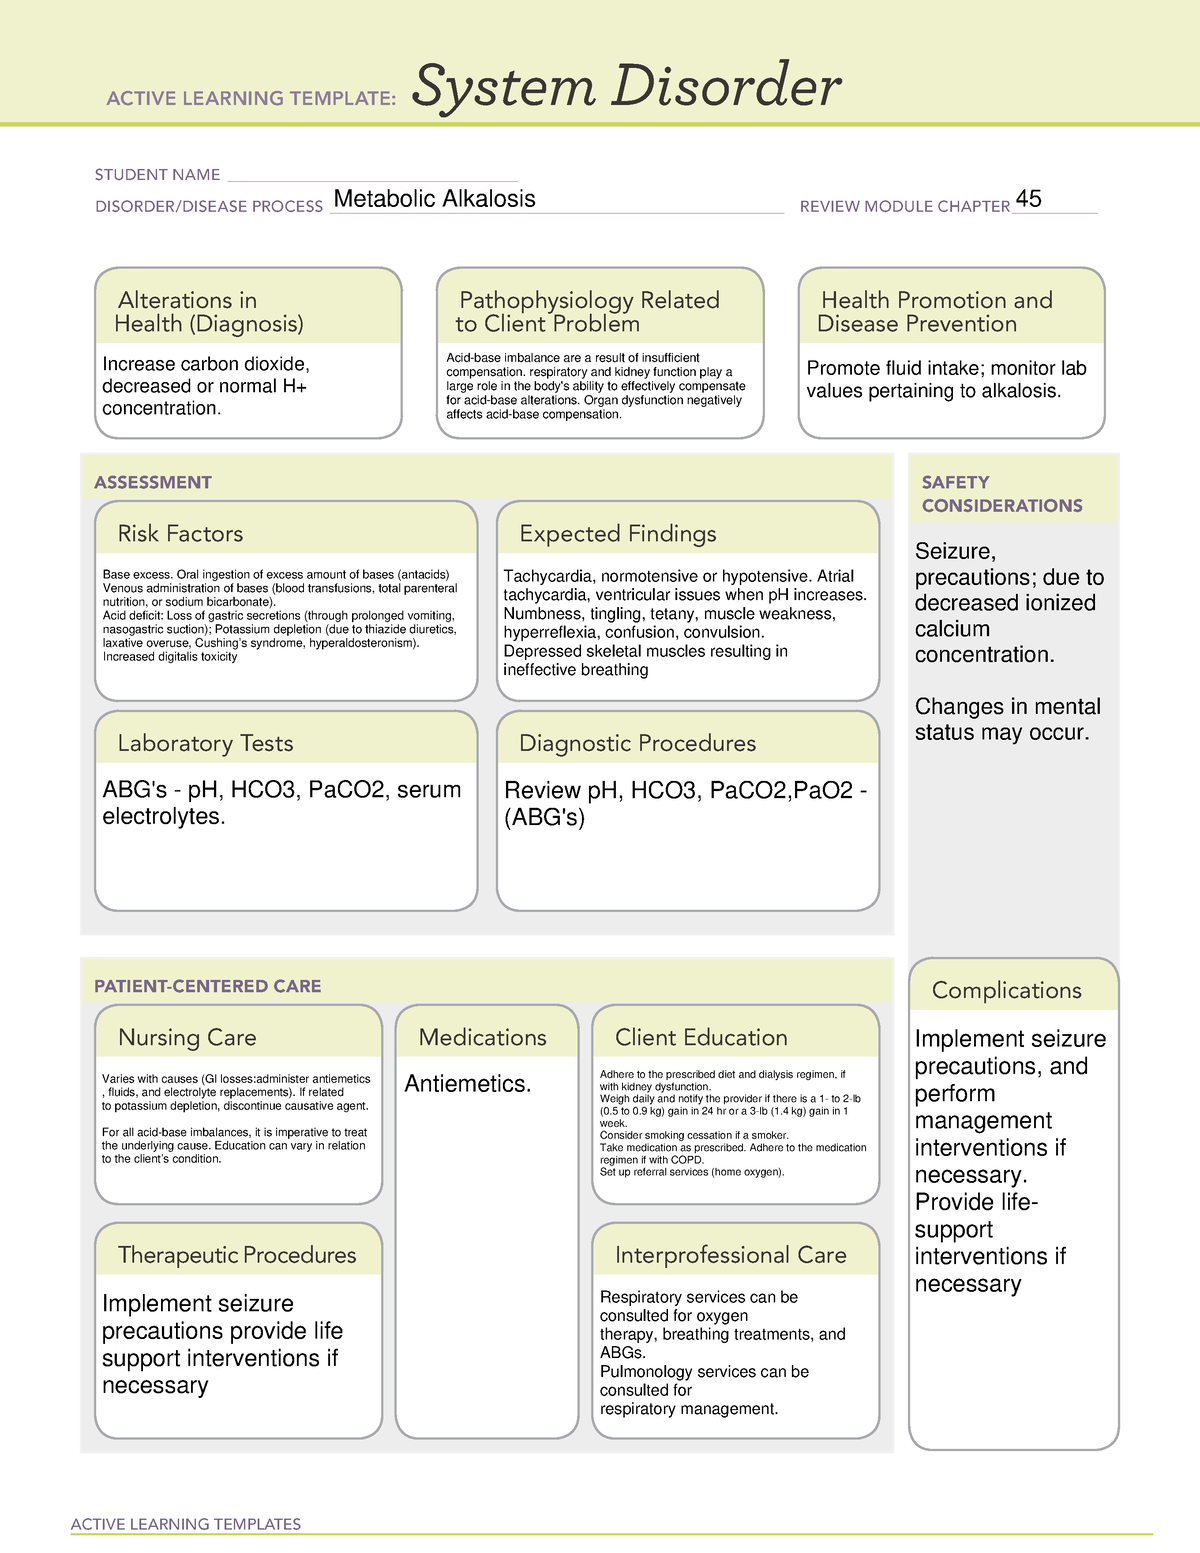 System Disorder - Metabolic Alkalosis - ACTIVE LEARNING TEMPLATES ...